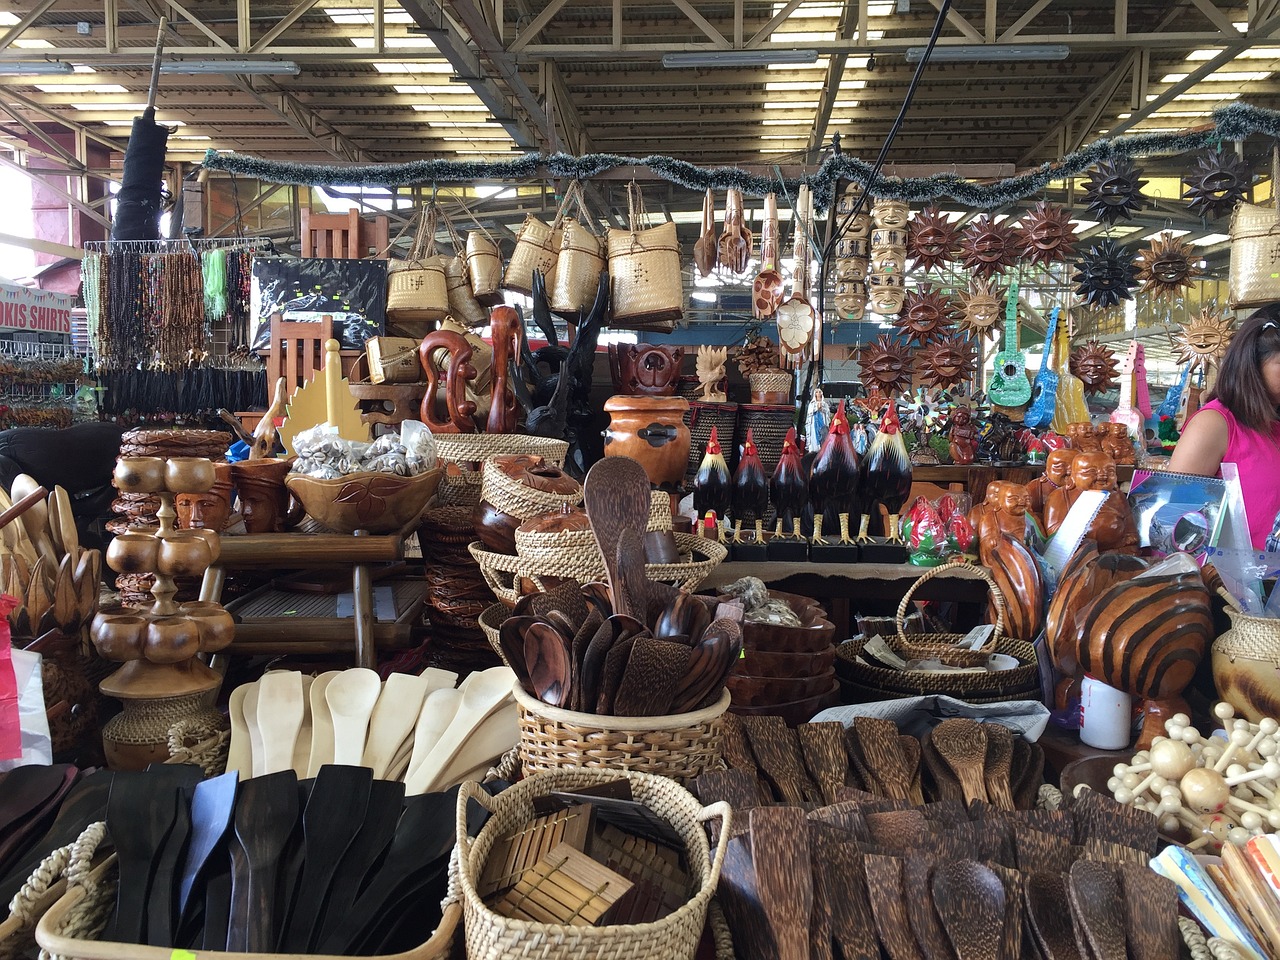 Colorful Baguio Souvenirs: A Display of Local Crafts and Treasures